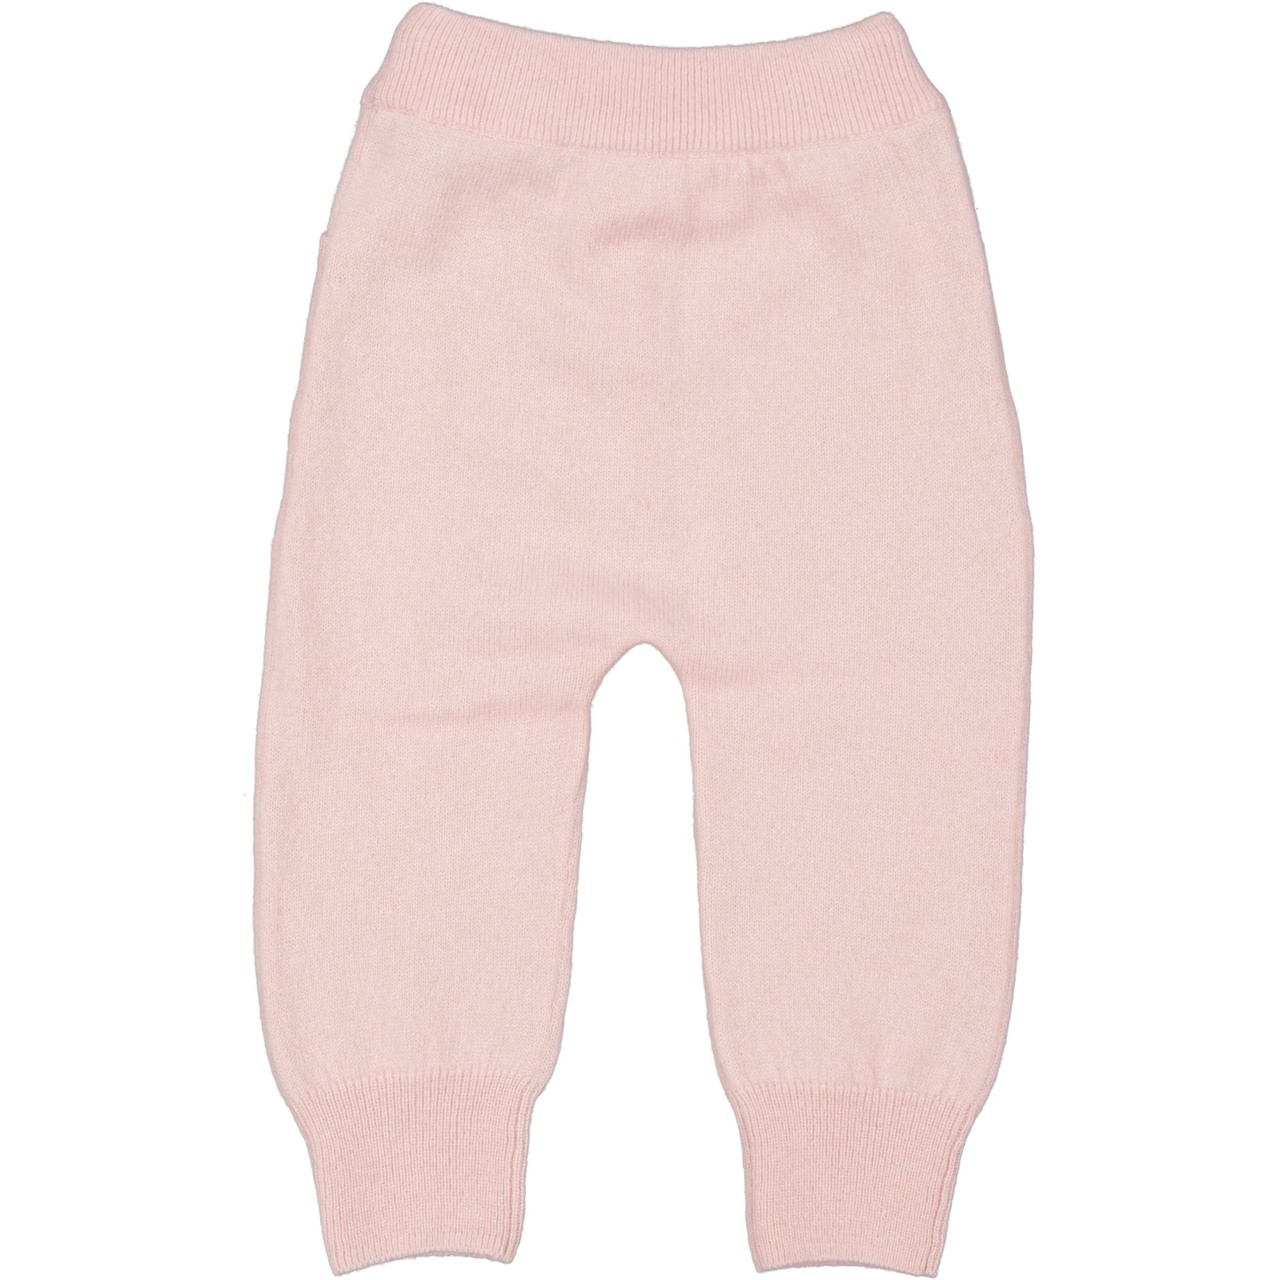 Cashmere trouser - Pink 98/104